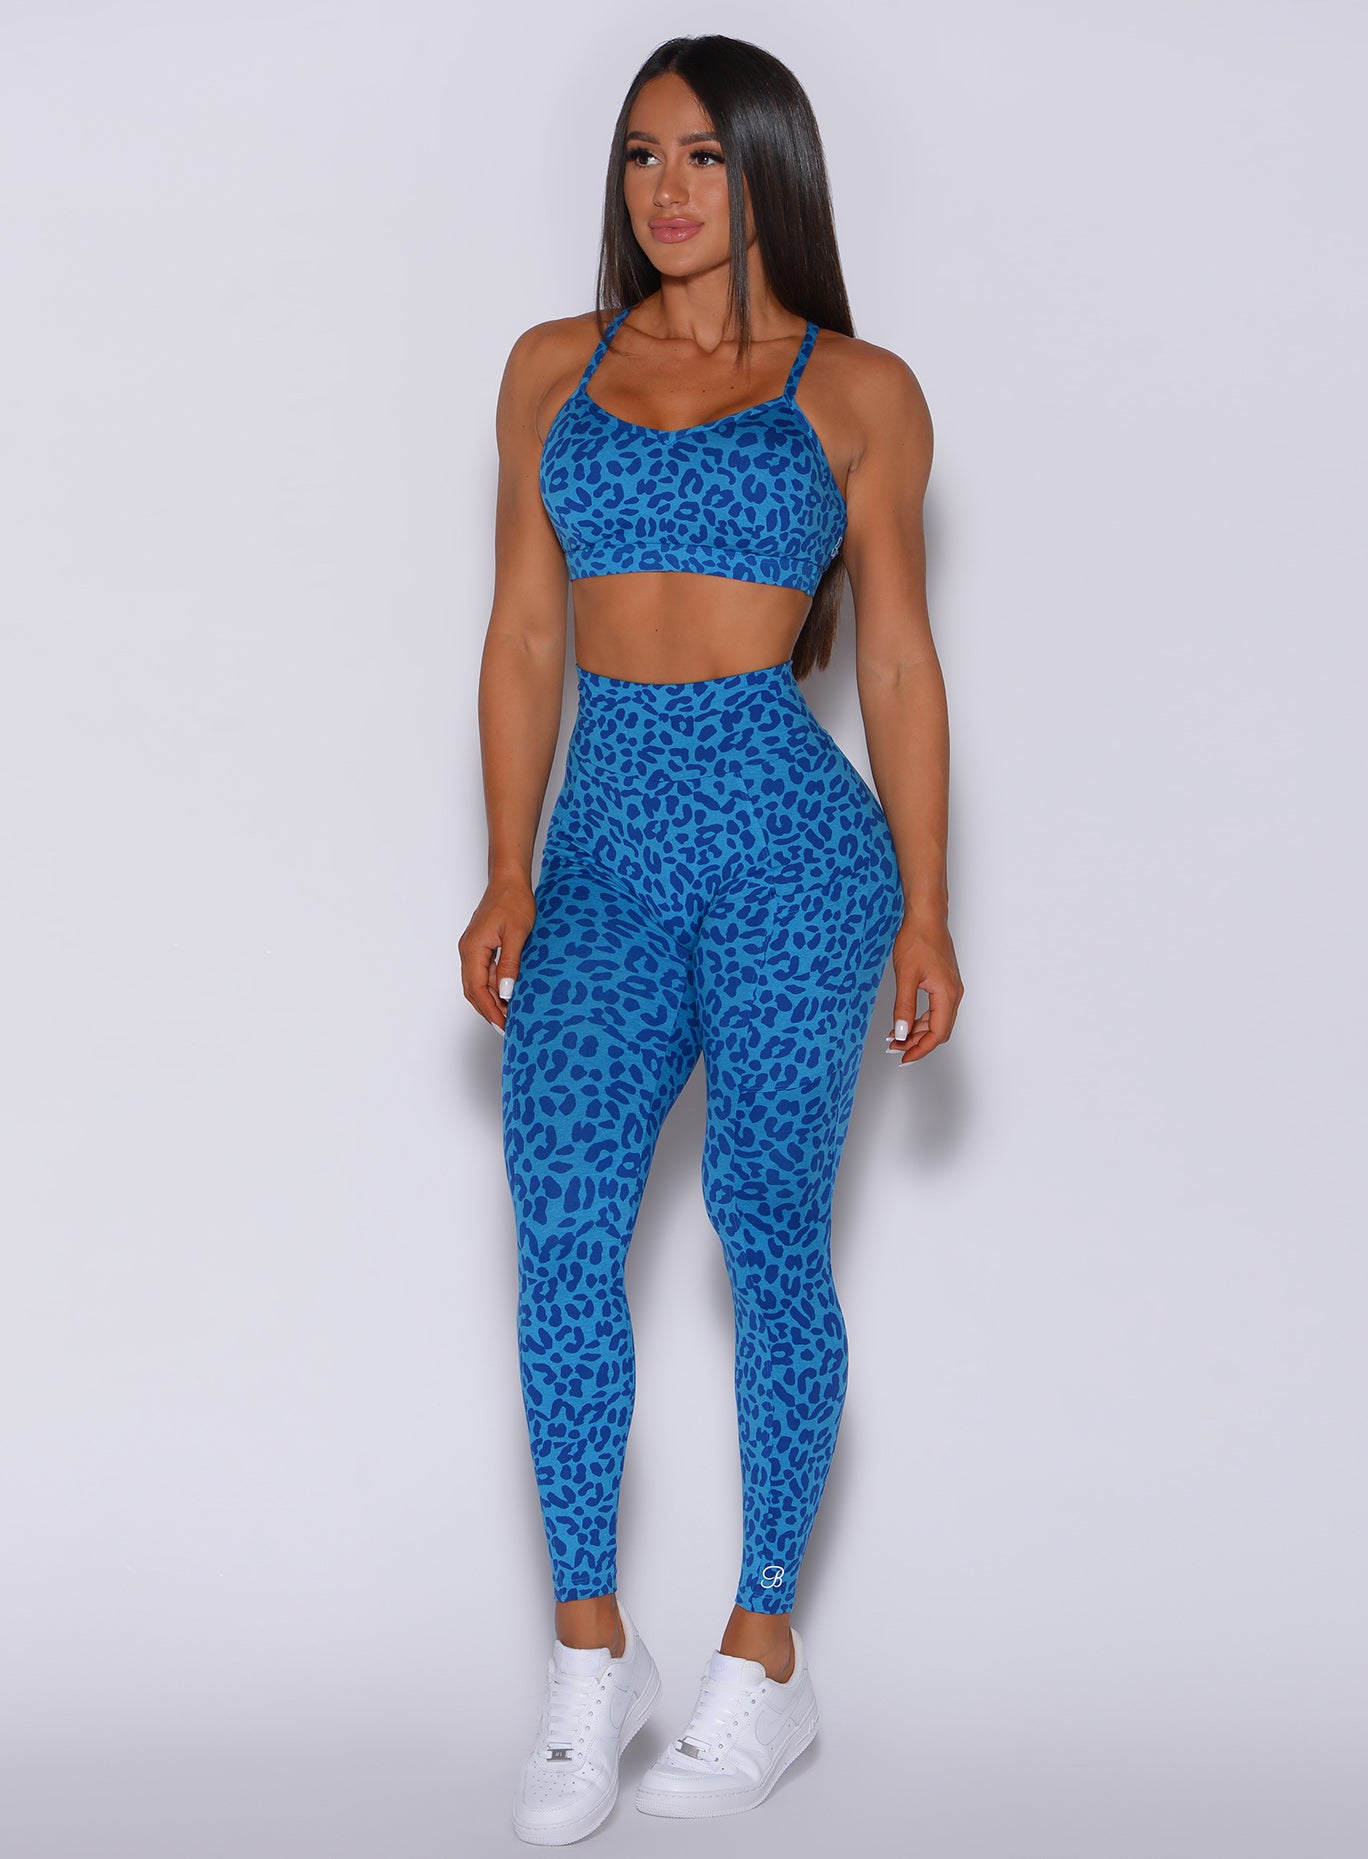 Front  profile view of a model facing to her right wearing our curves leggings in blue cheetah color and a matching bra